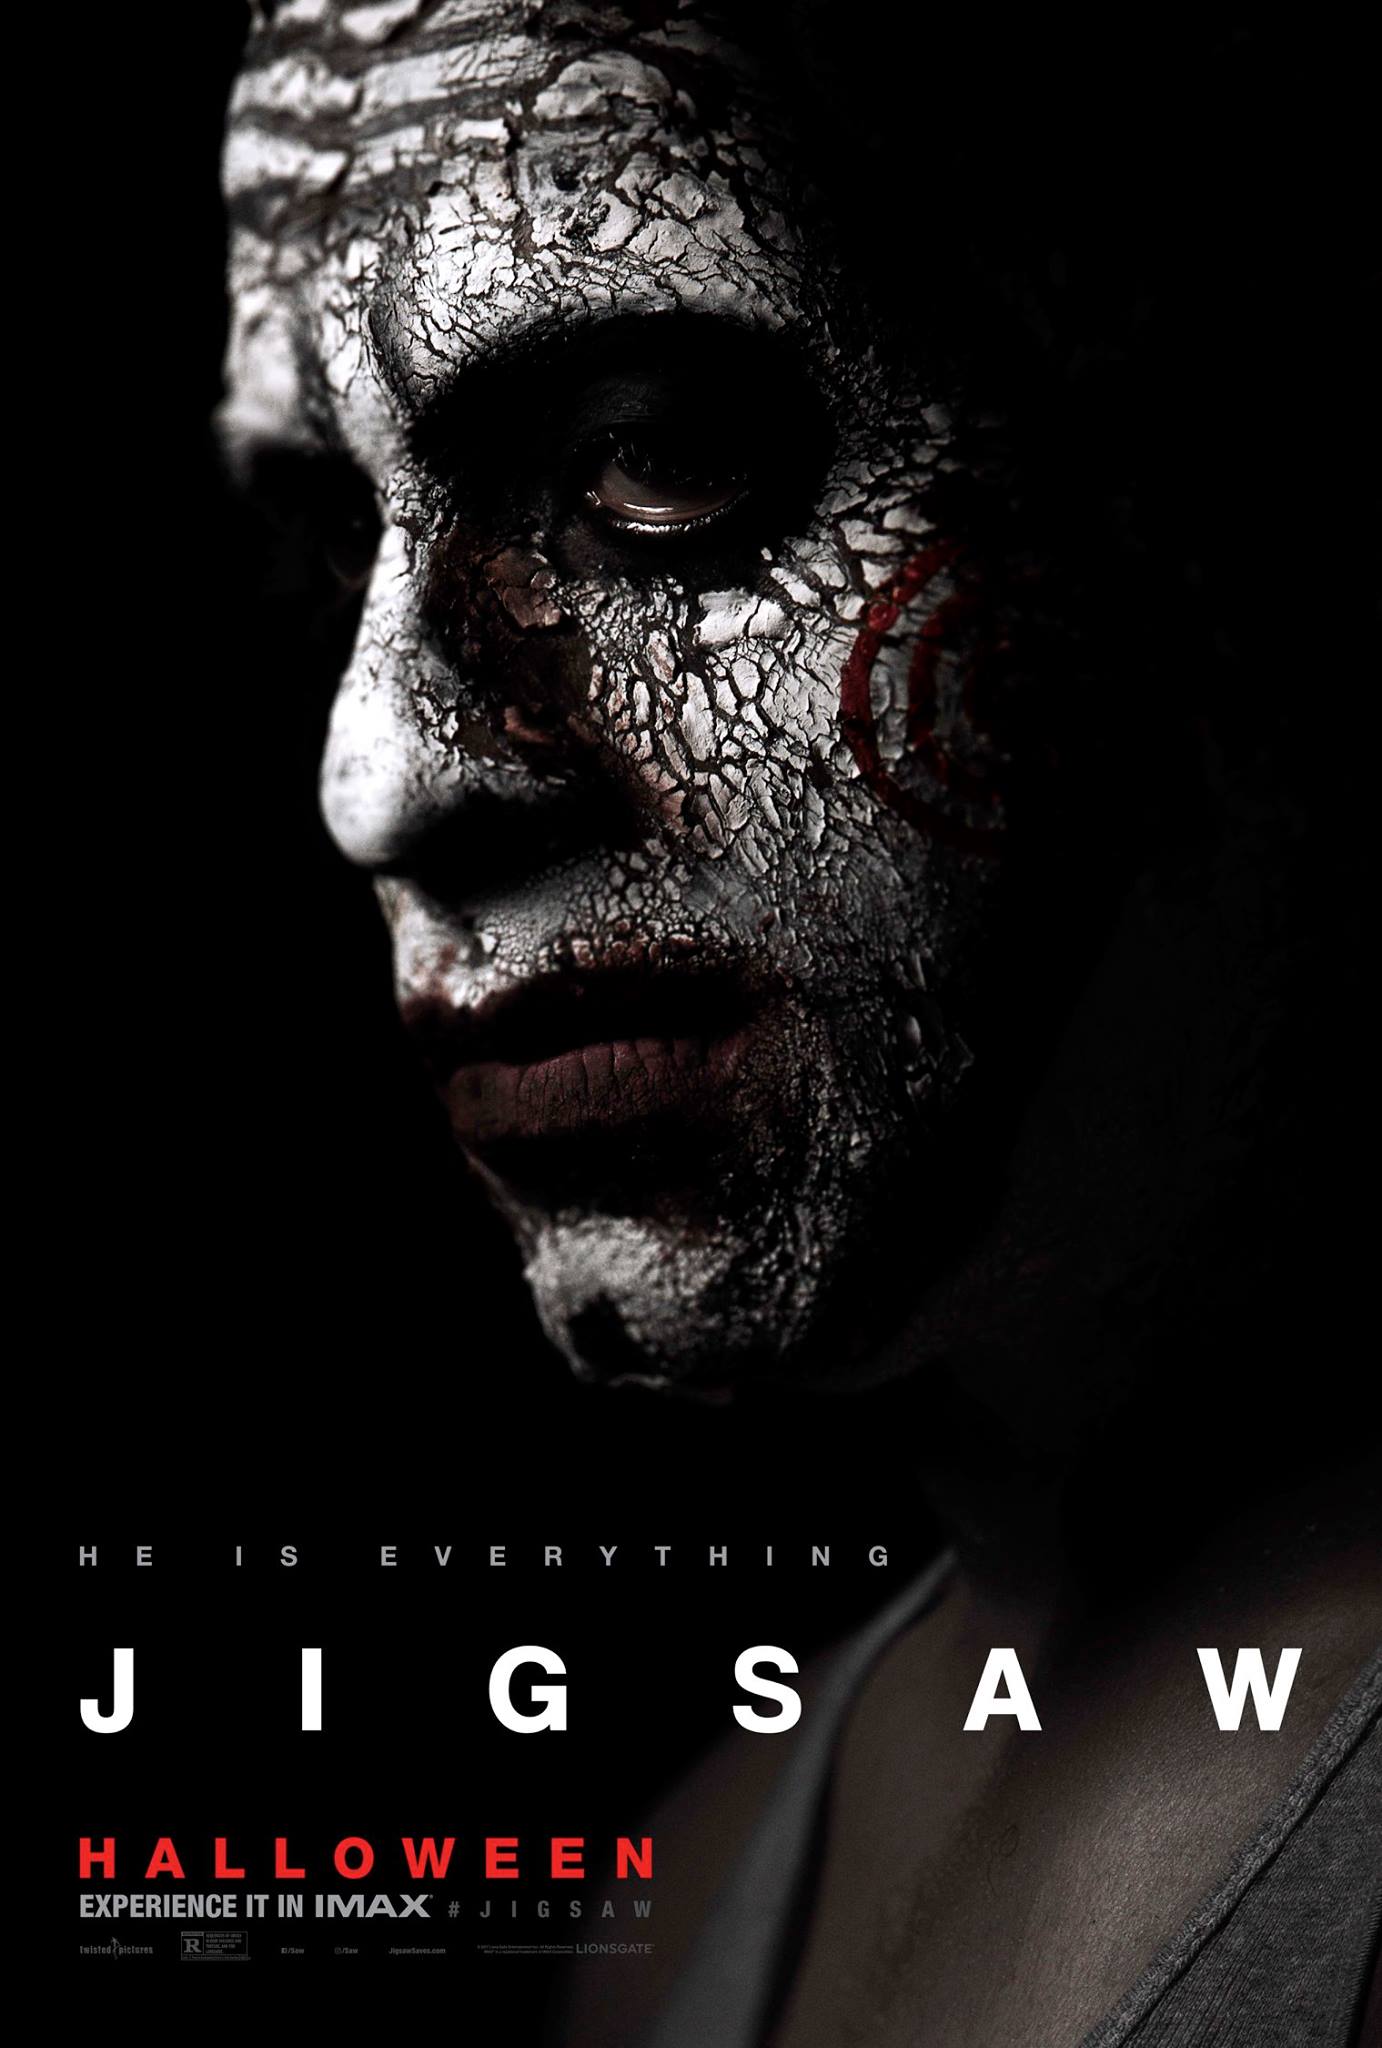 jigsaw character poster 2